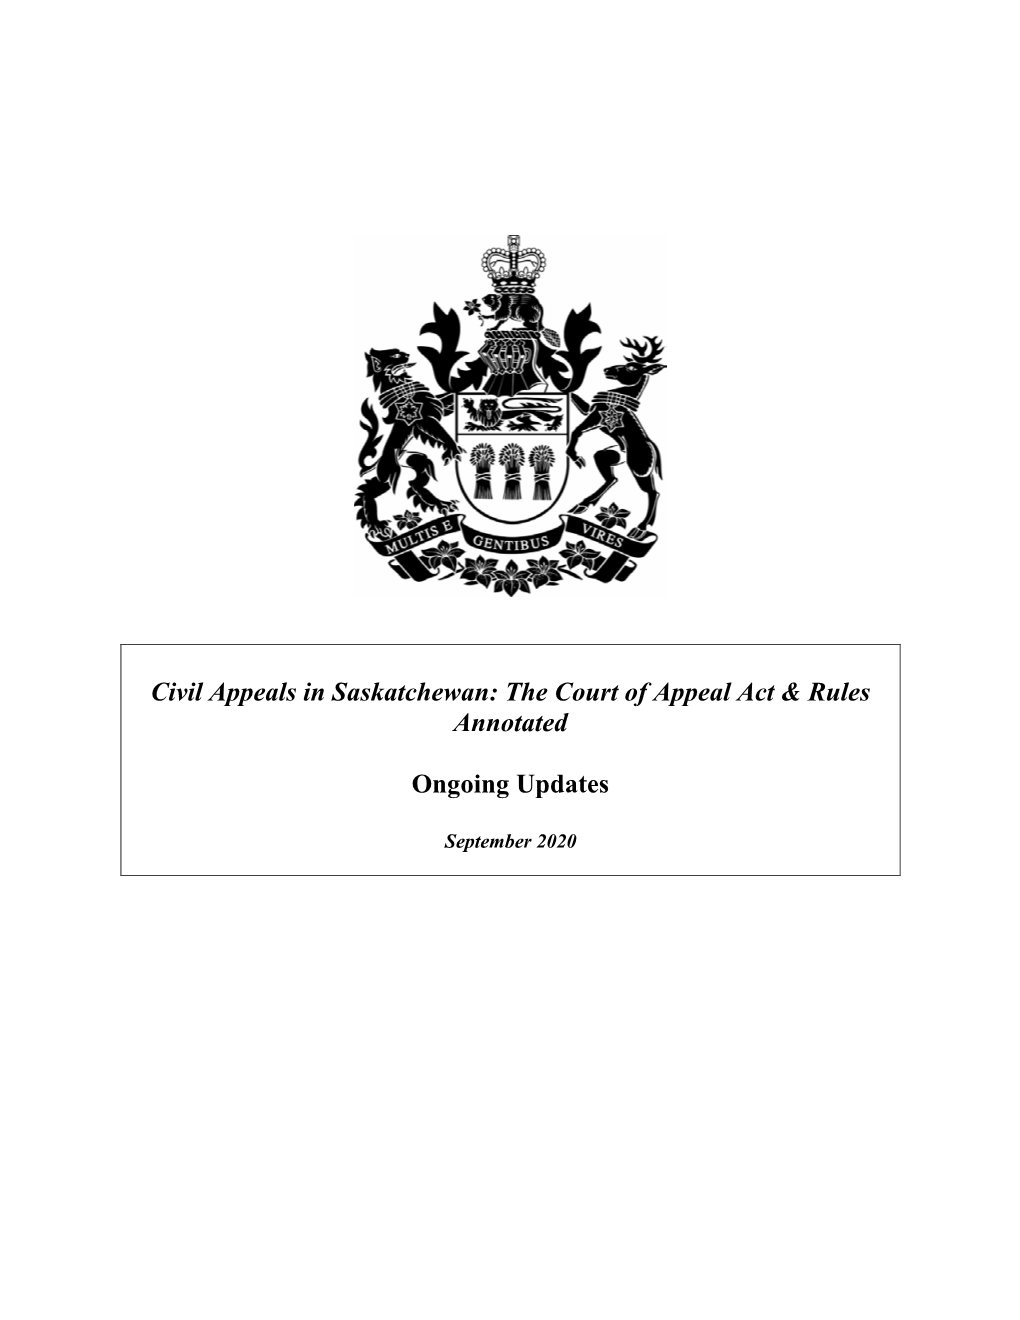 Civil Appeals in Saskatchewan: the Court of Appeal Act & Rules Annotated